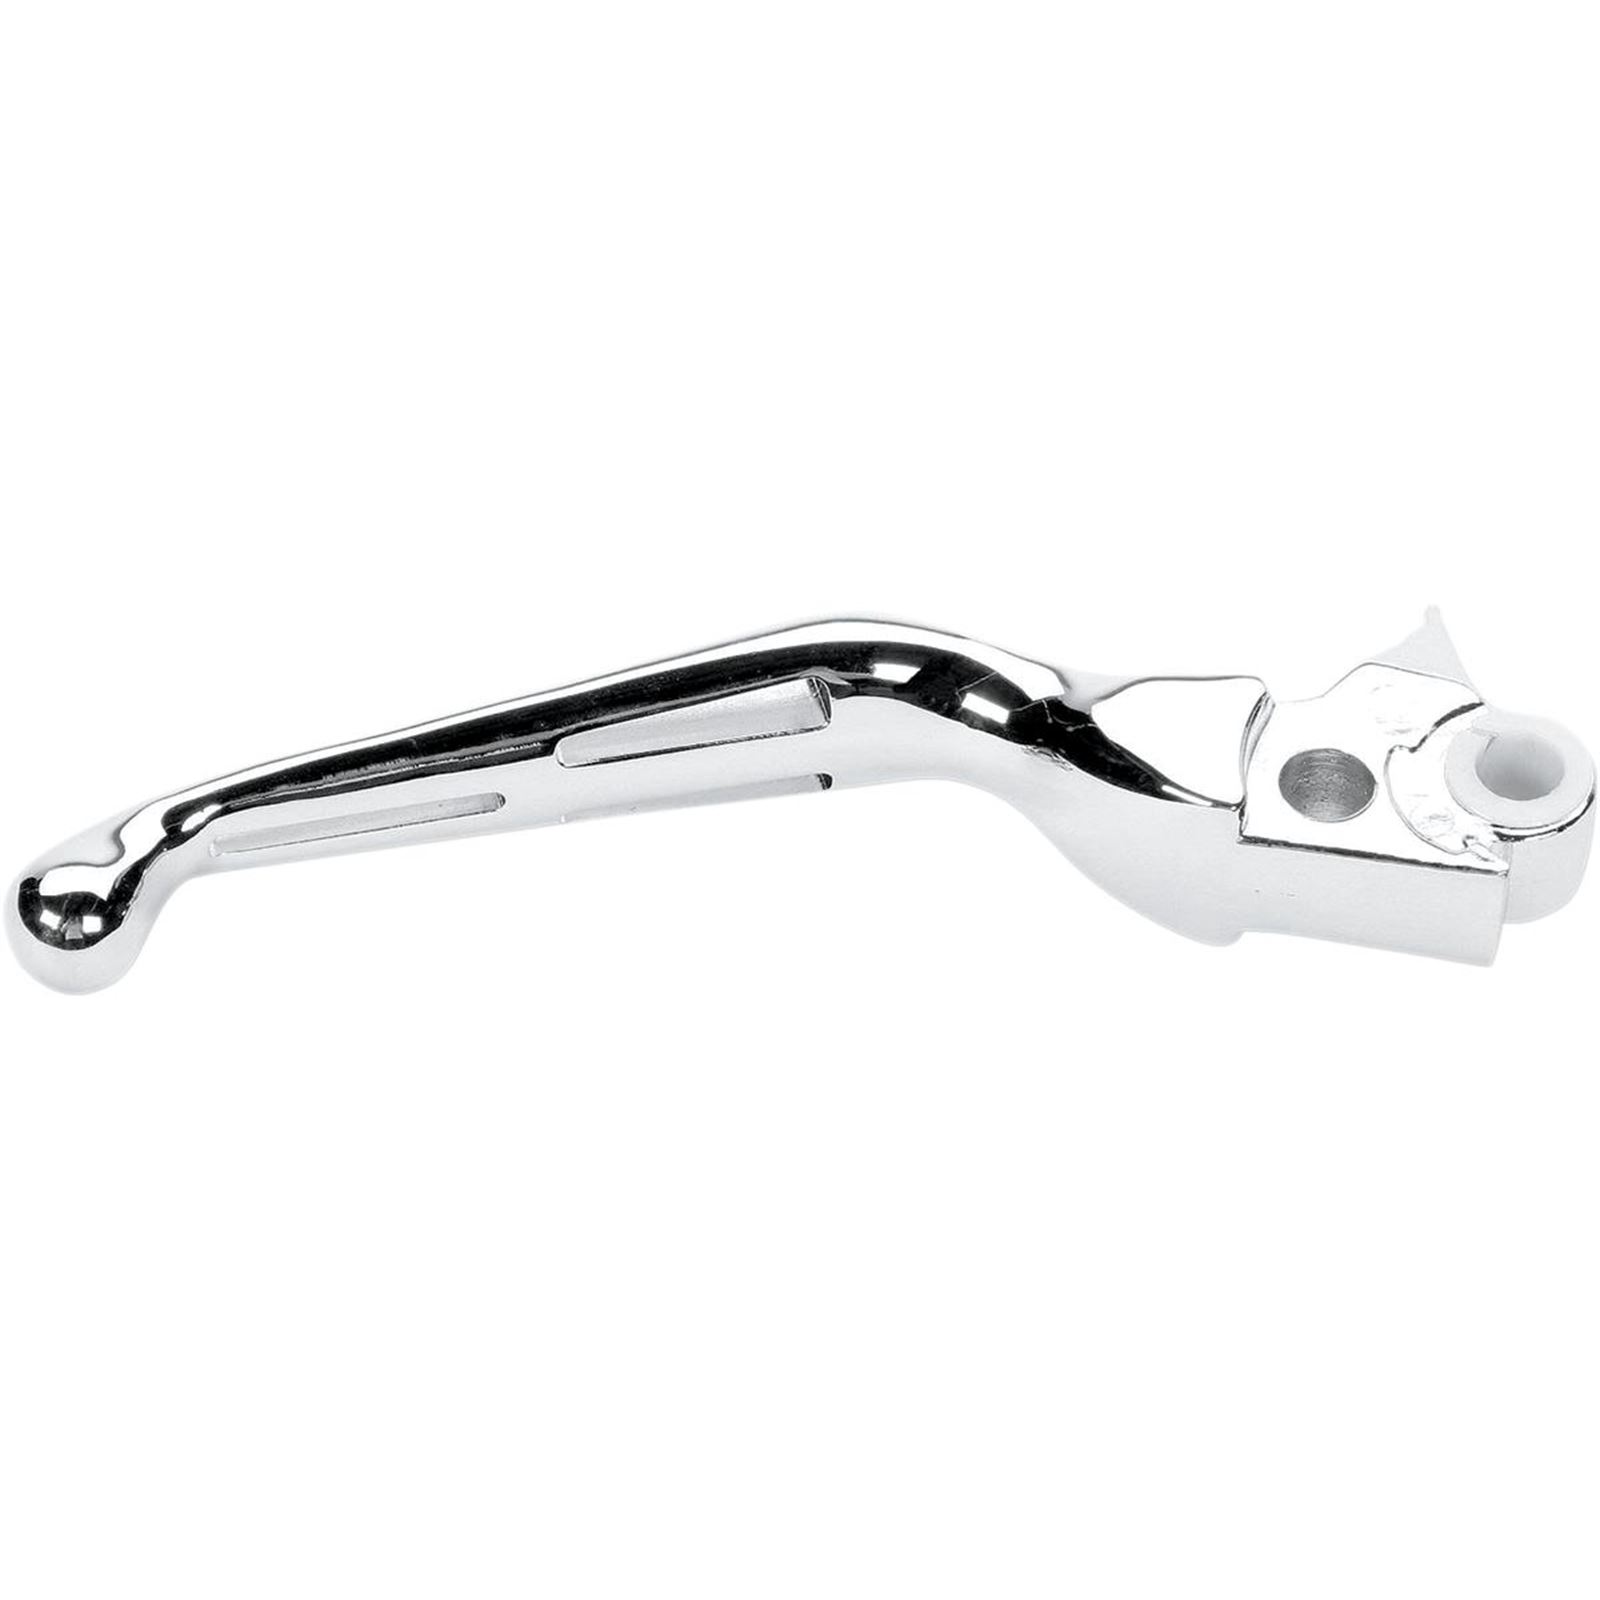 Drag Specialties Chrome Slotted Brake Lever